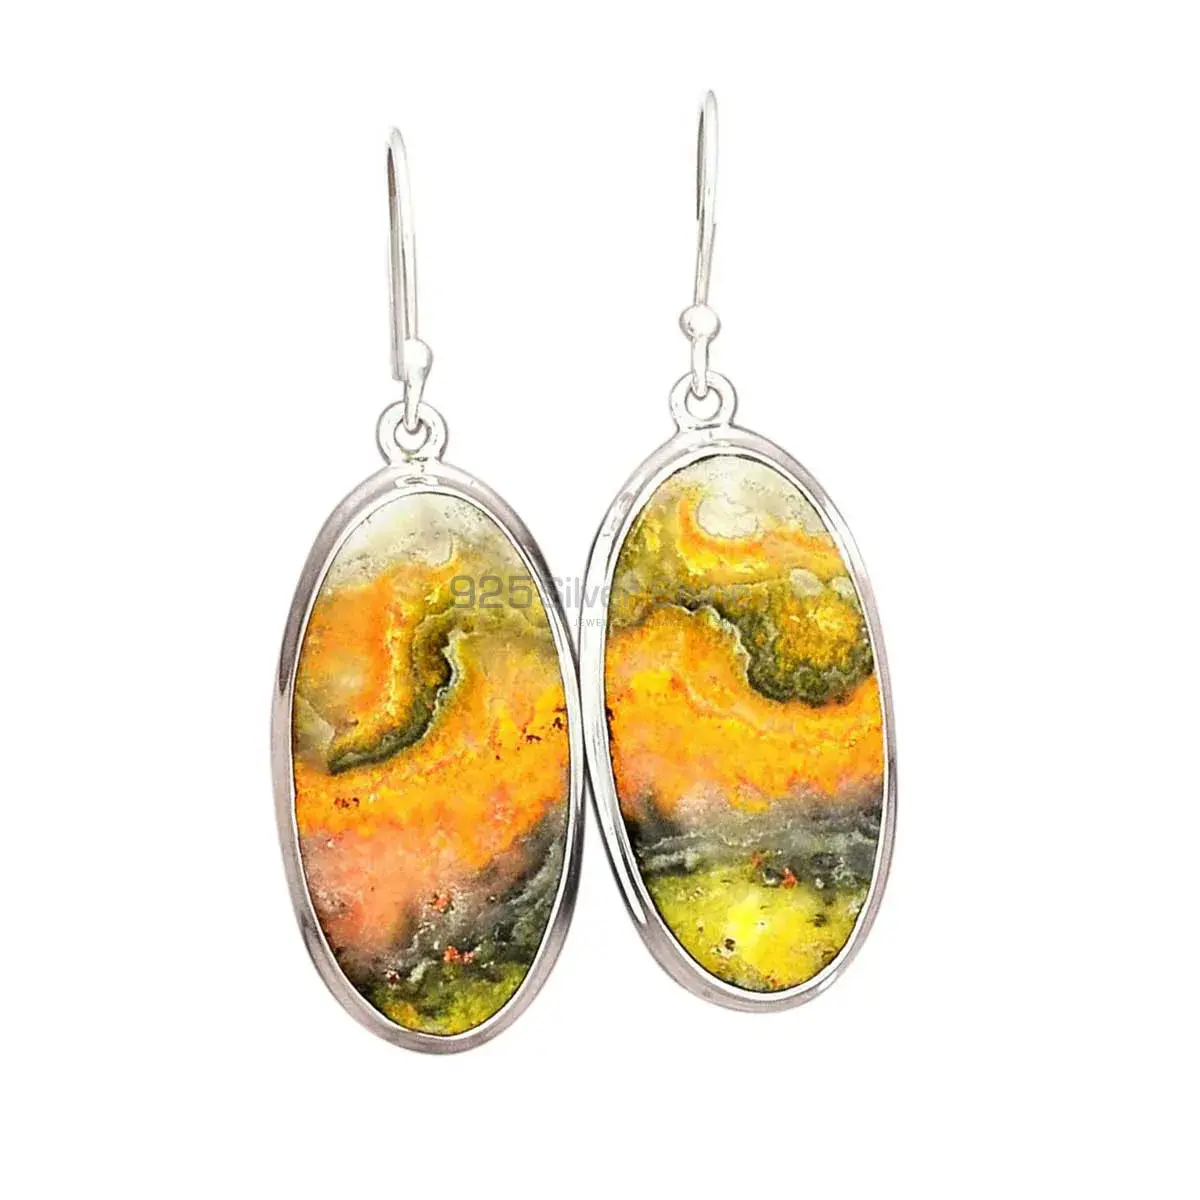 Semi Precious Bumble Bee Gemstone Earrings Manufacturer In 925 Sterling Silver Jewelry 925SE2737